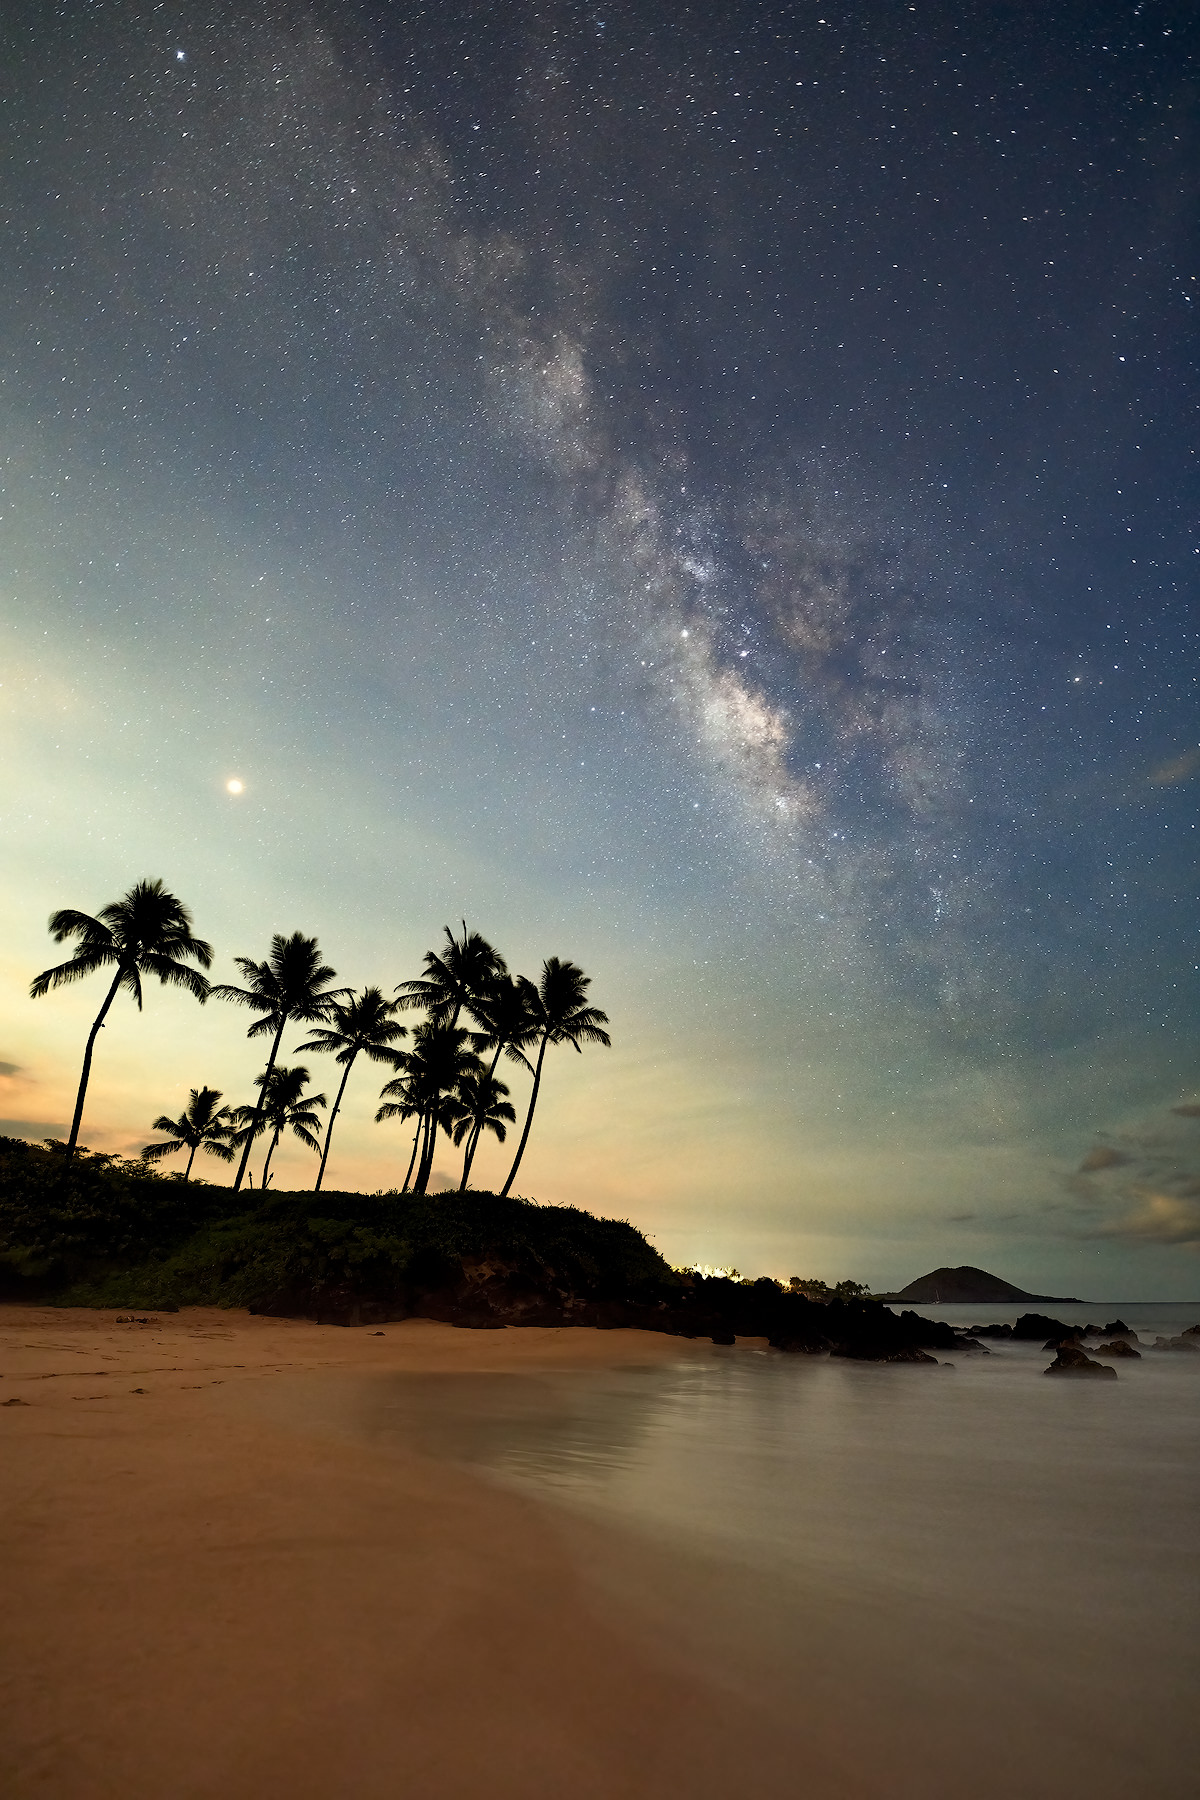 a night time image of the milky way galaxy over the beautiful beach in Makena on the island of Maui, Hawaii.  Fine art nature photography by Andrew Shoemaker